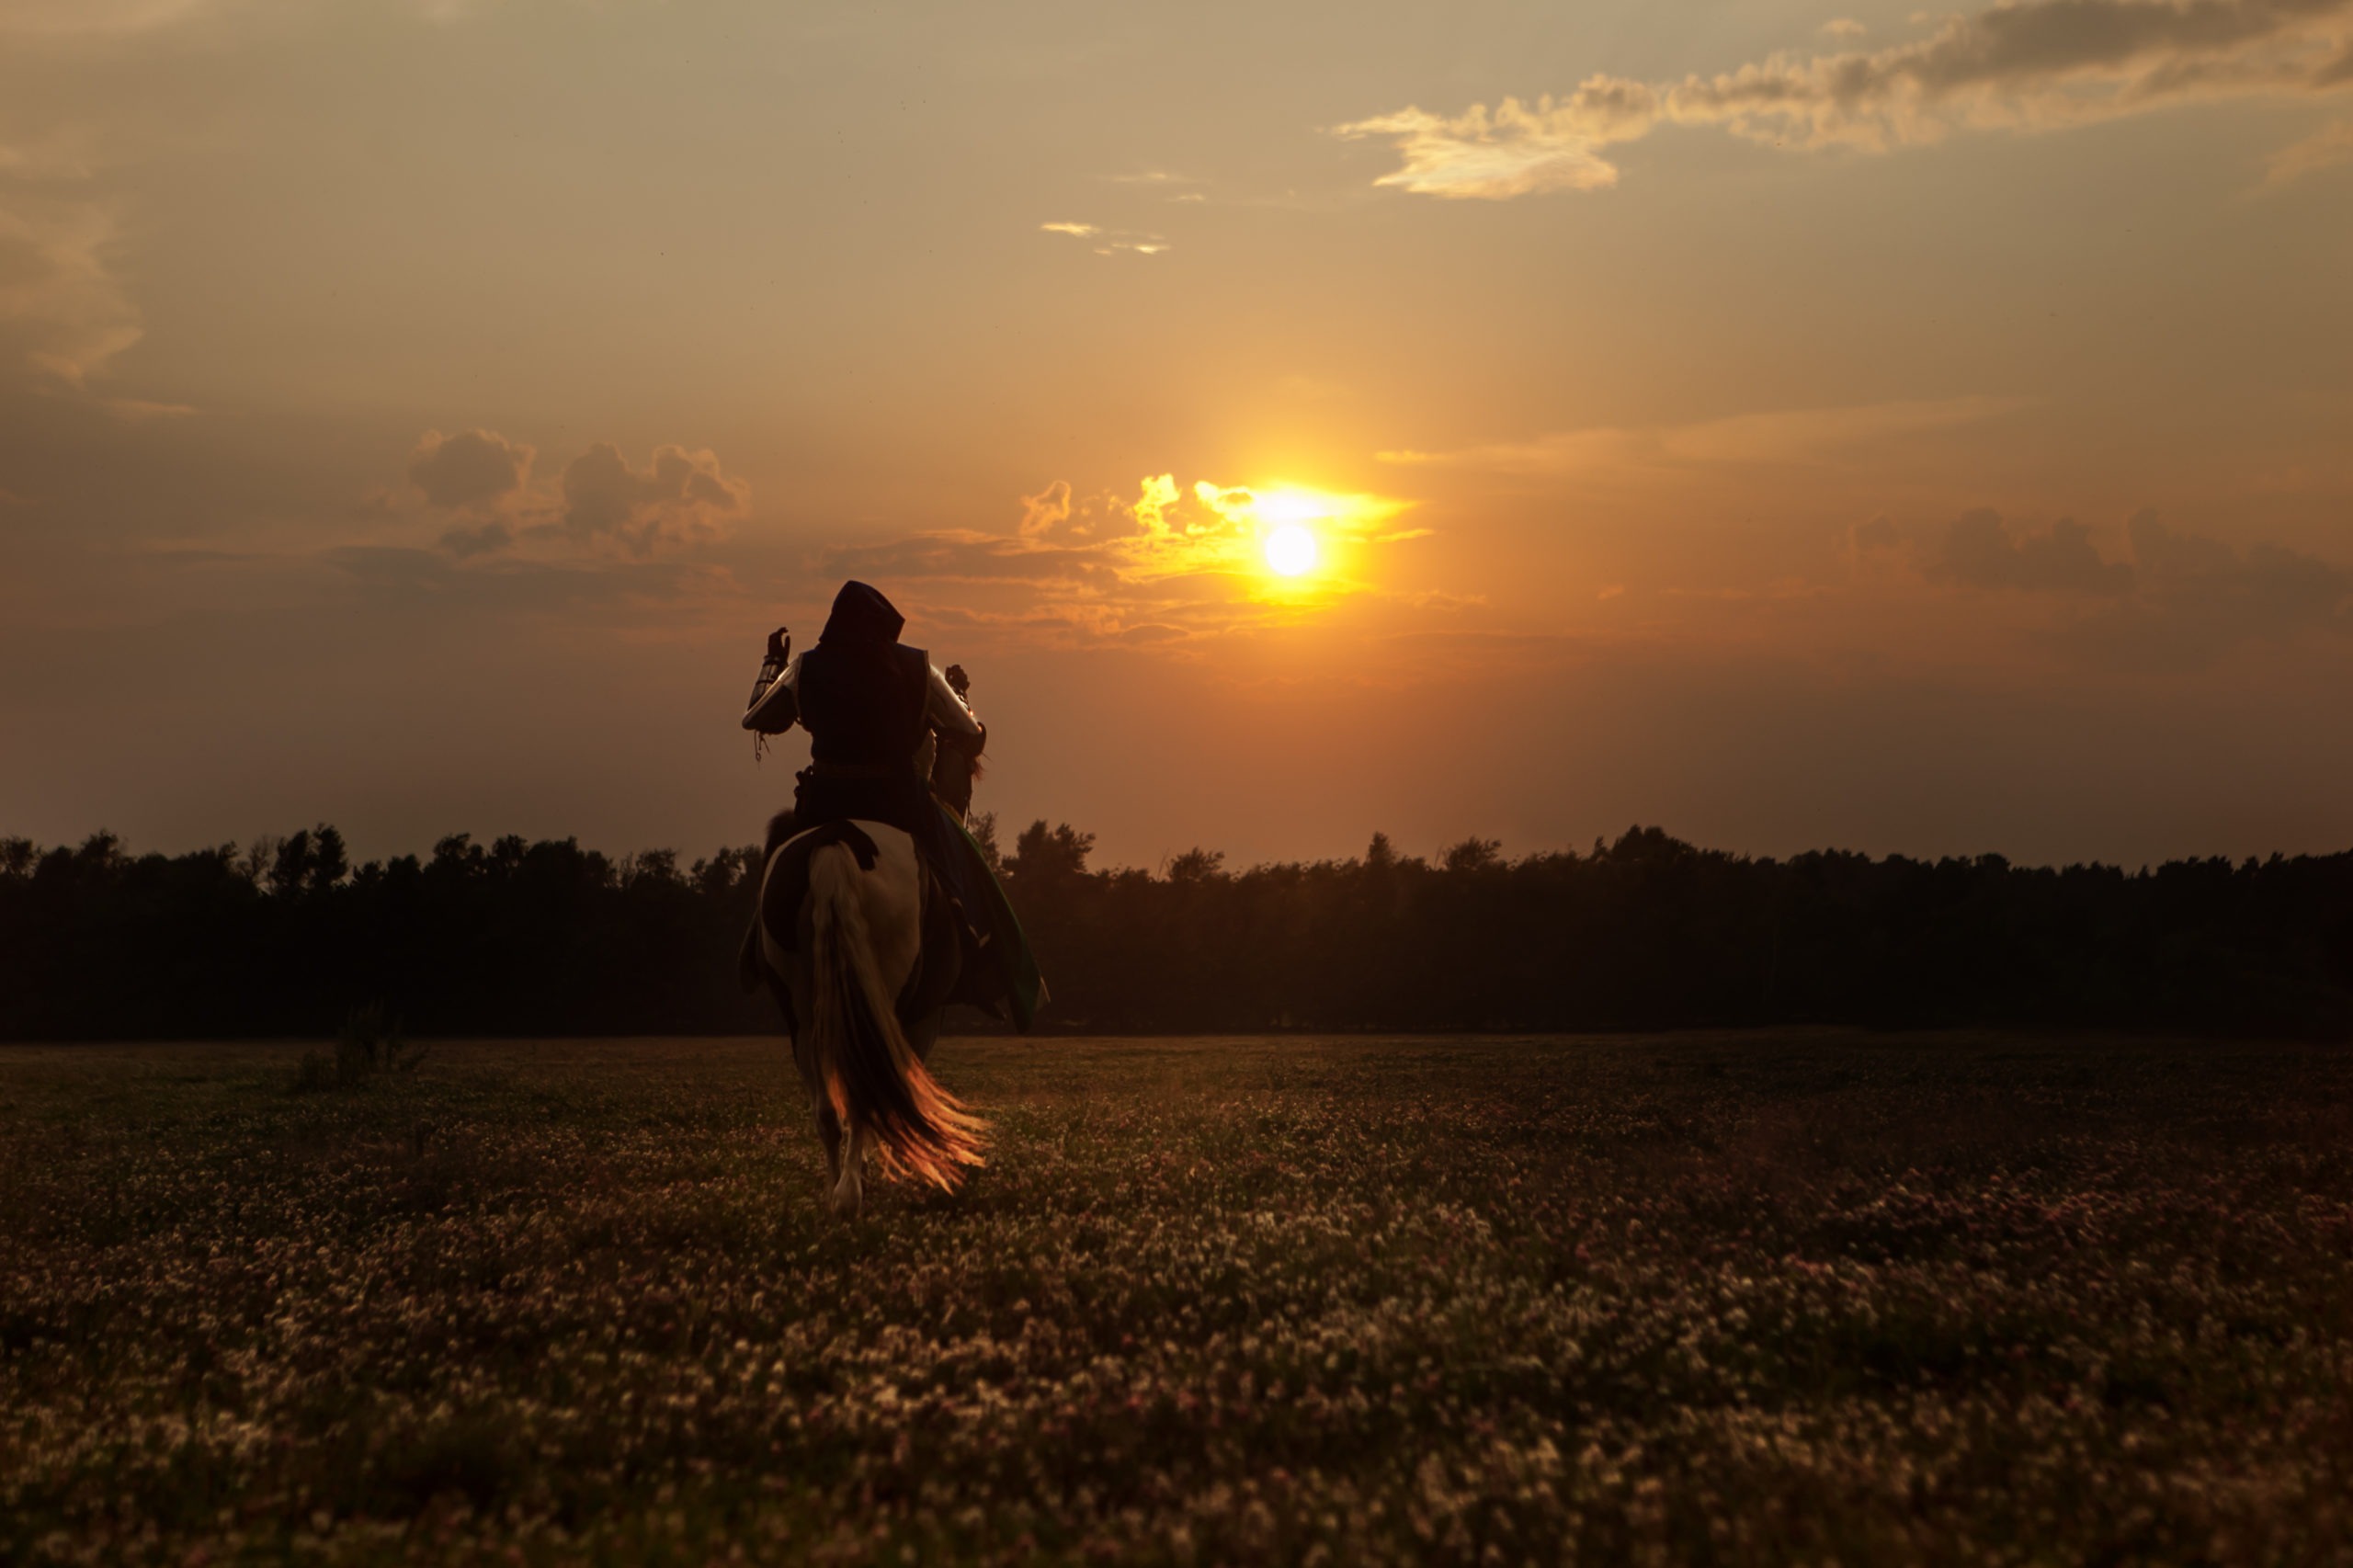 Silhouette of a man on a horse riding toward the sunset.